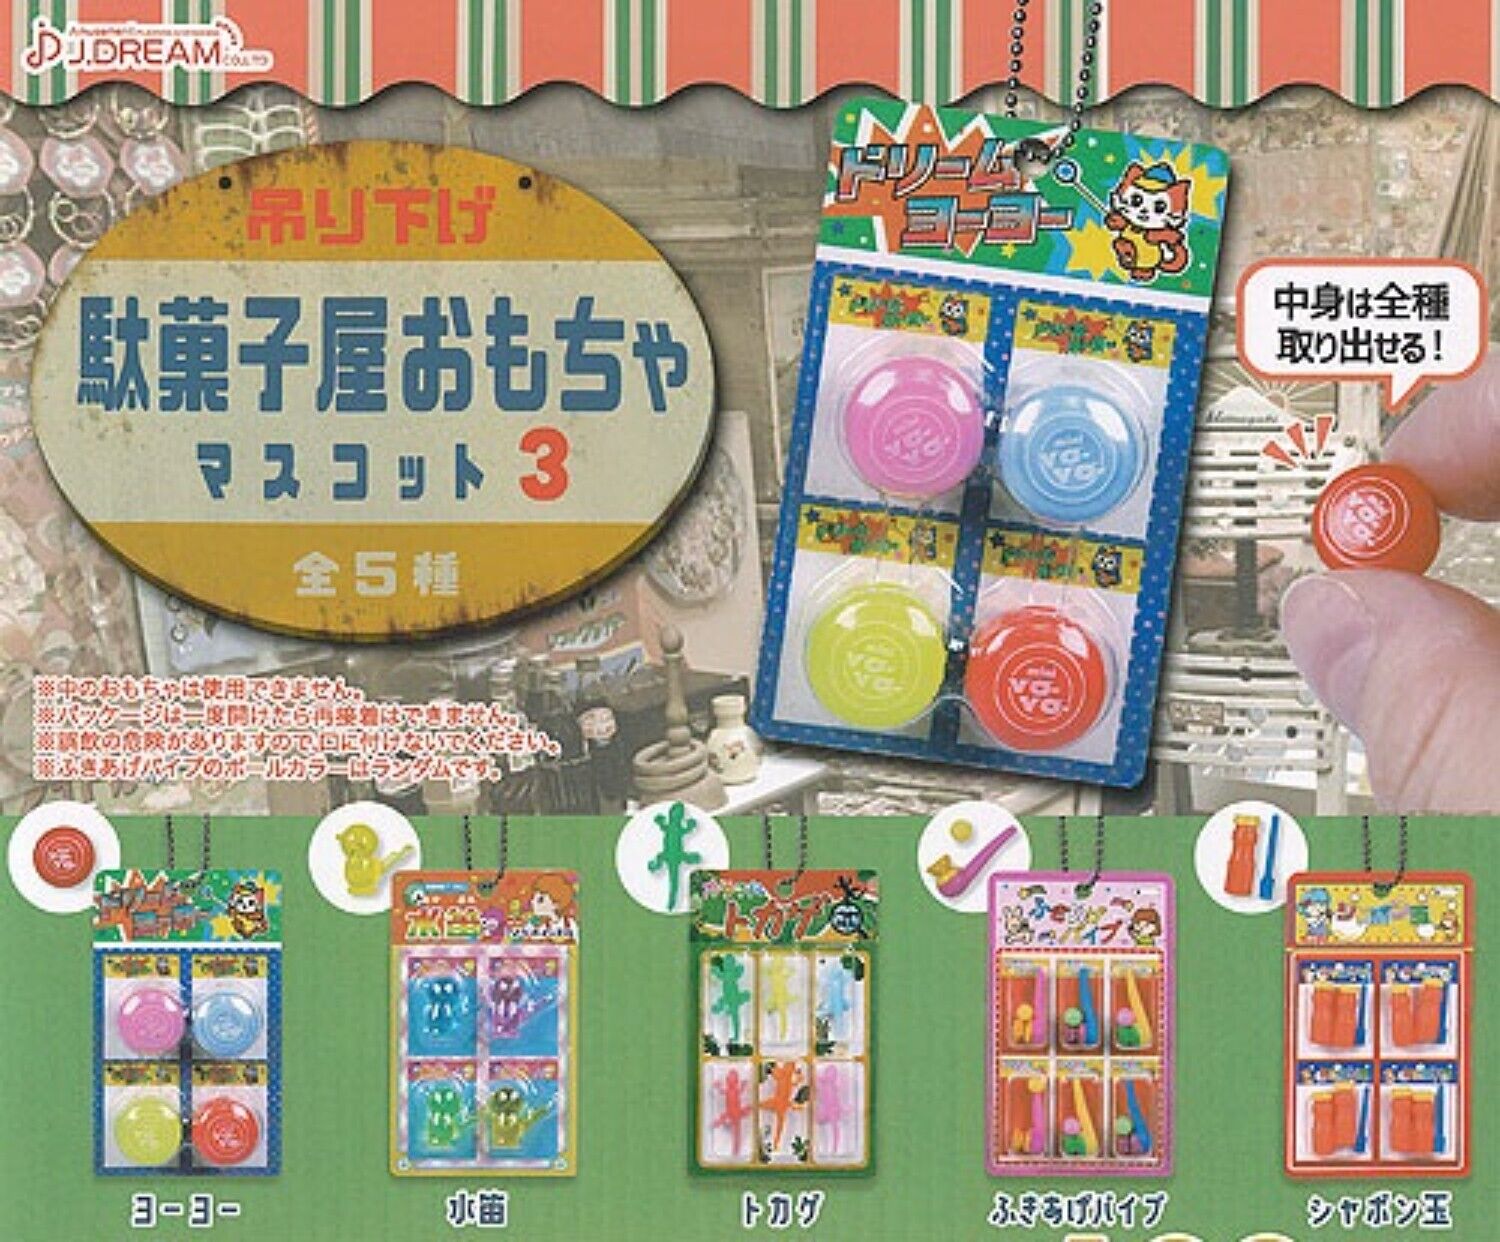 Hanging candy store Toy Mascot 3 Capsule Toy 5 Types Full Comp Set Gacha New